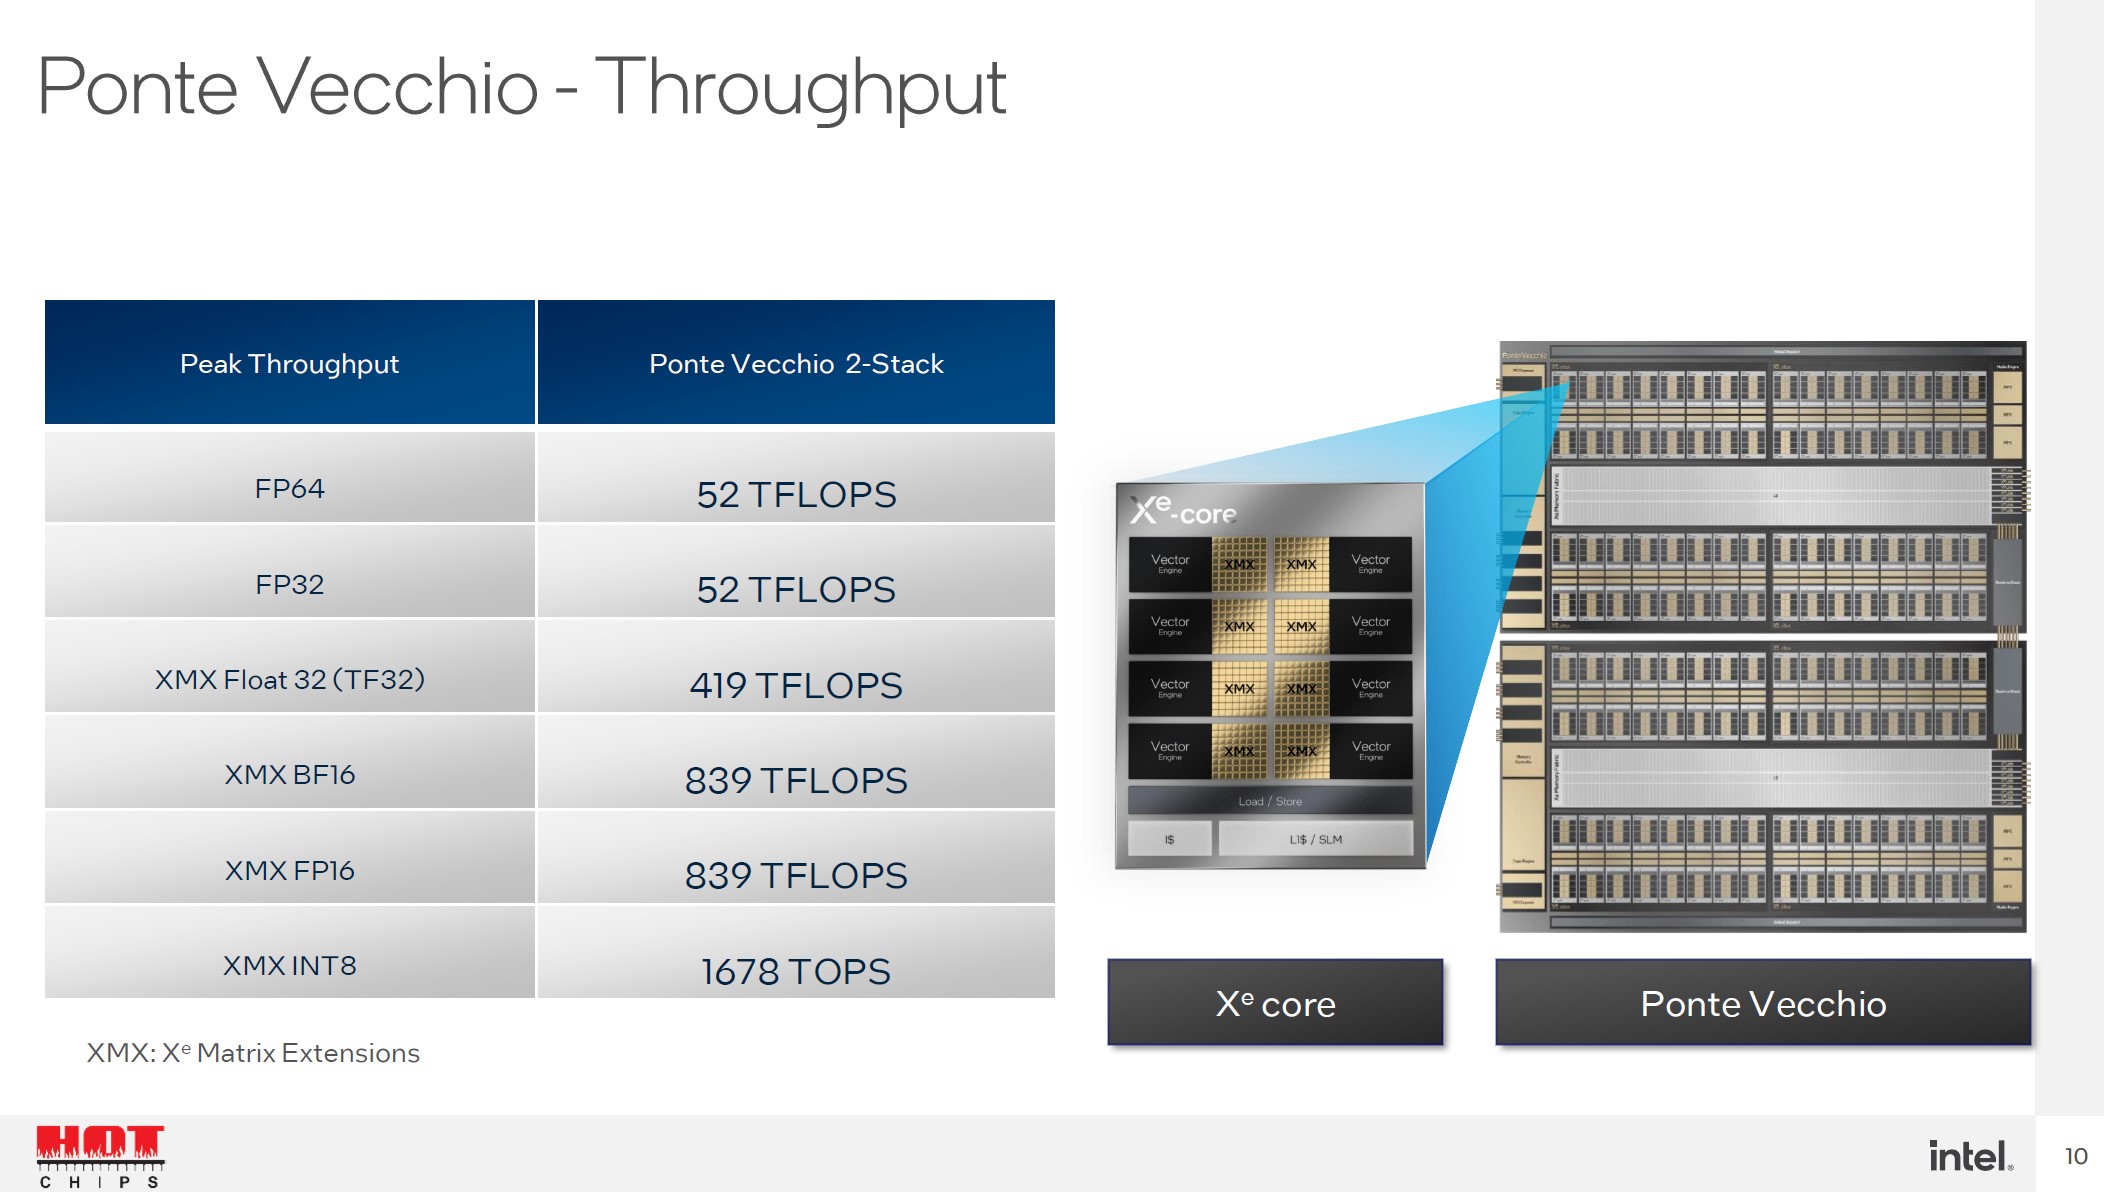 HC34 Intel OneAPI Big Picture For Ponte Vecchio And More